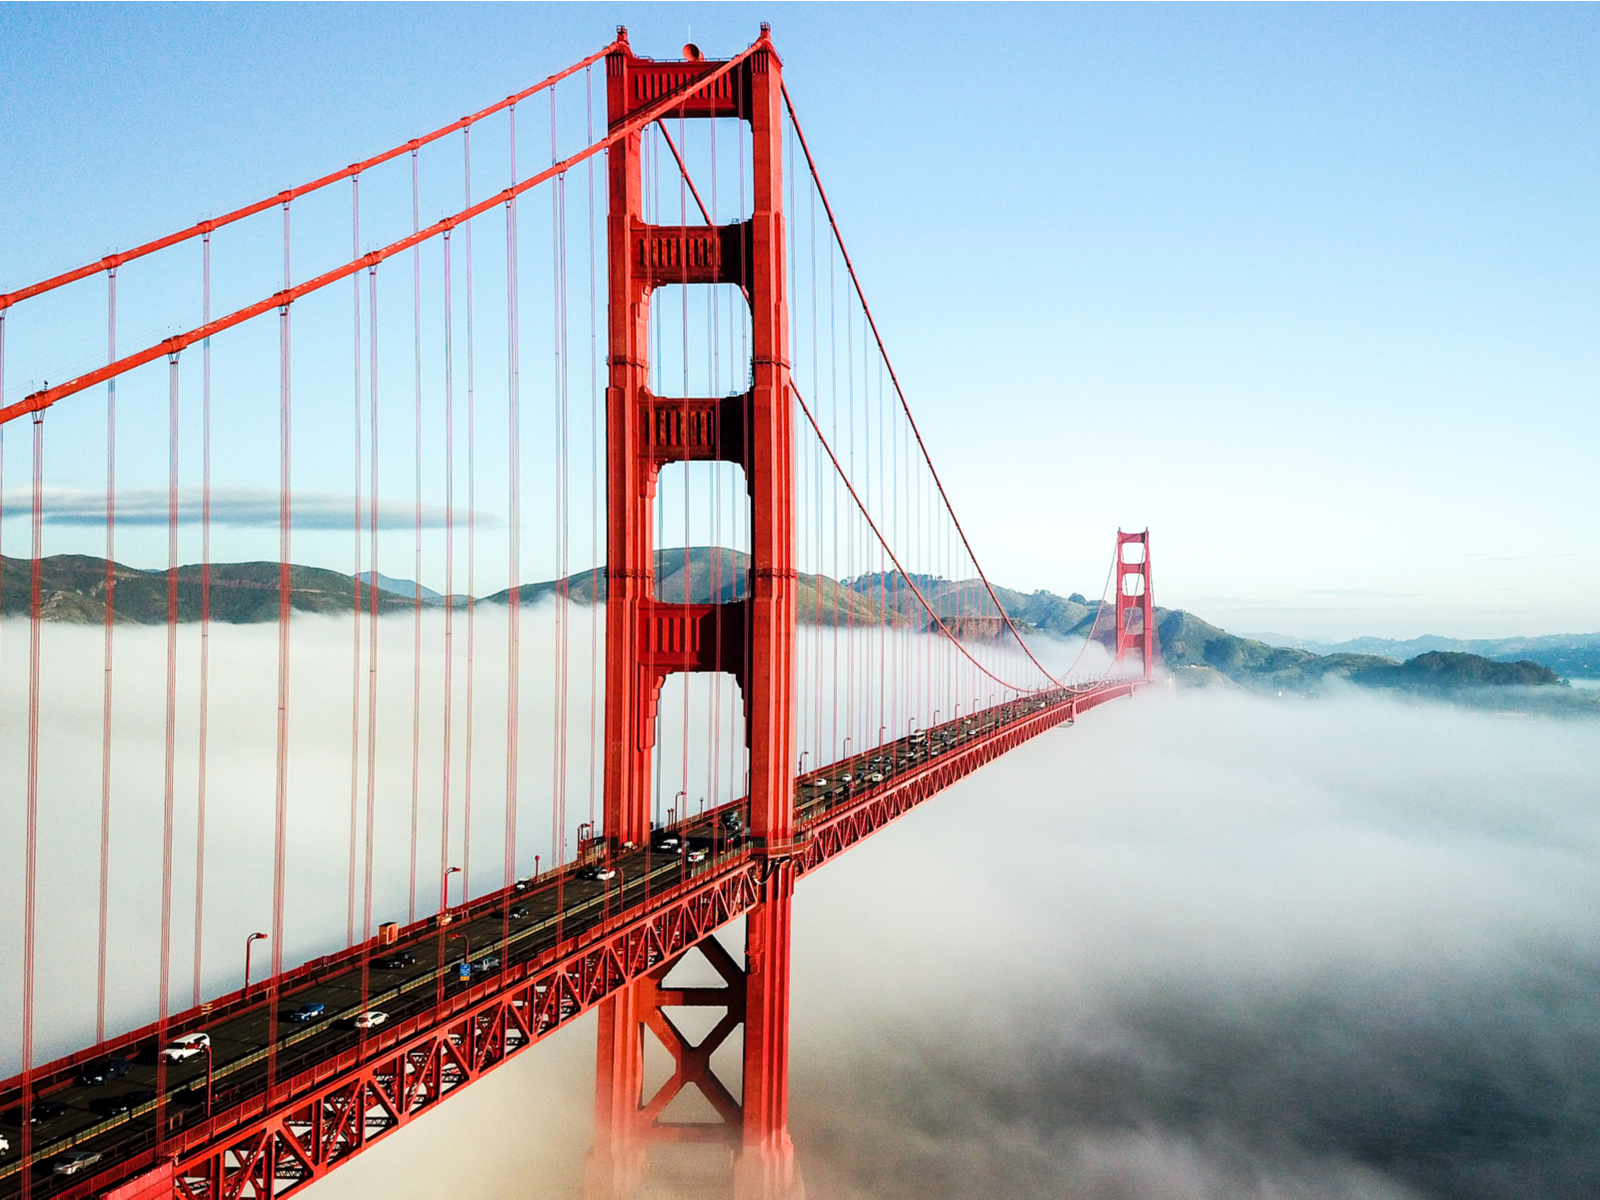 Misty morning at the Golden Gate Bridge in San Francisco, a piece on the most iconic places in America, where cars are seen traversing the bridge